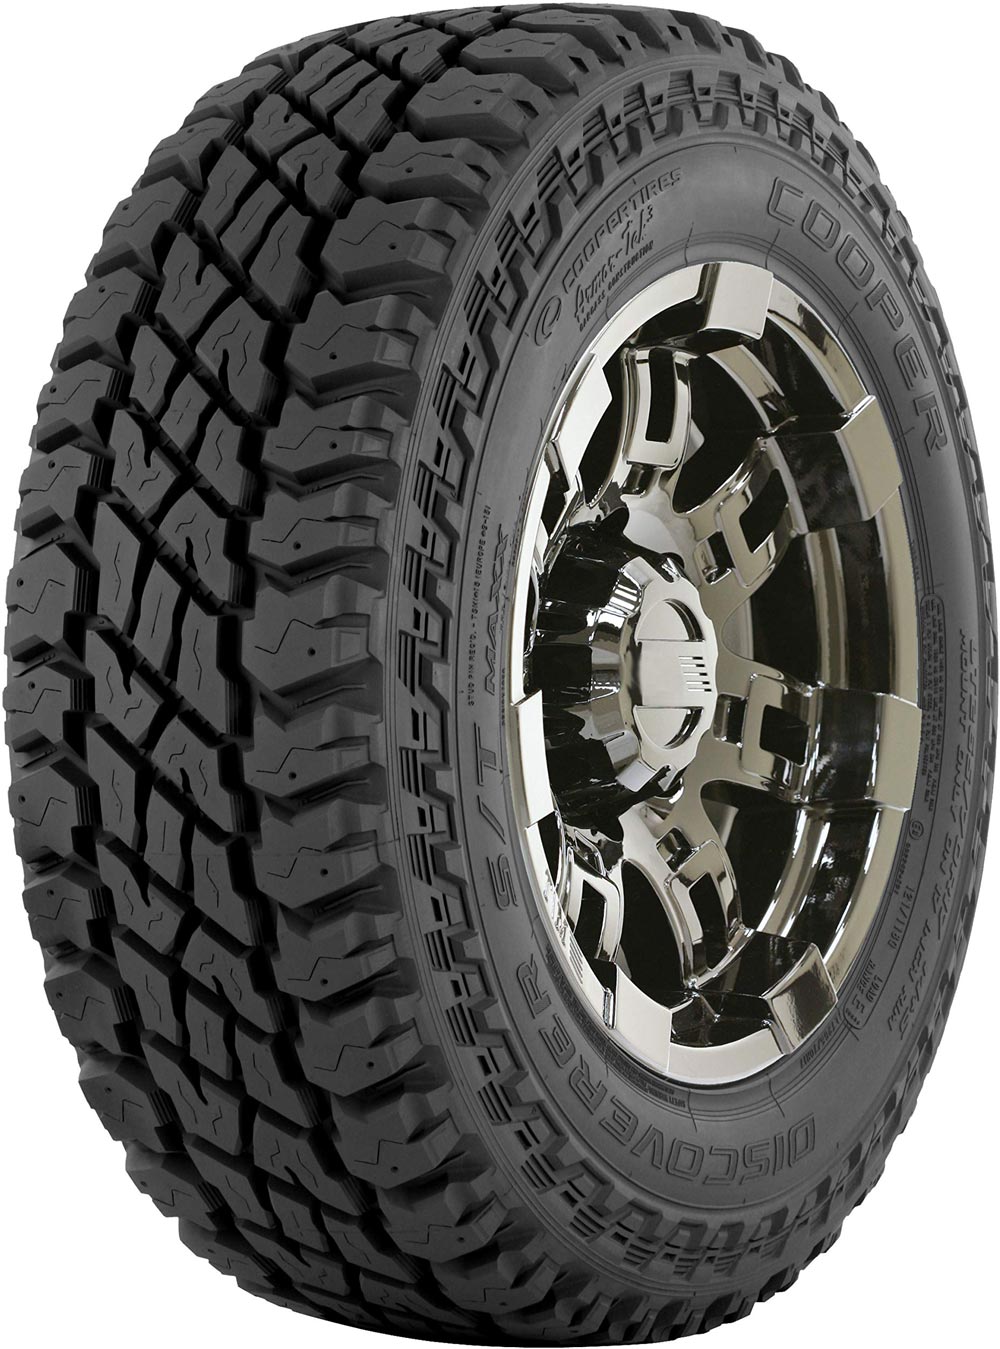 COOPER DISCOVERER ST MAXX P O BSW 315/70 R17 121Q